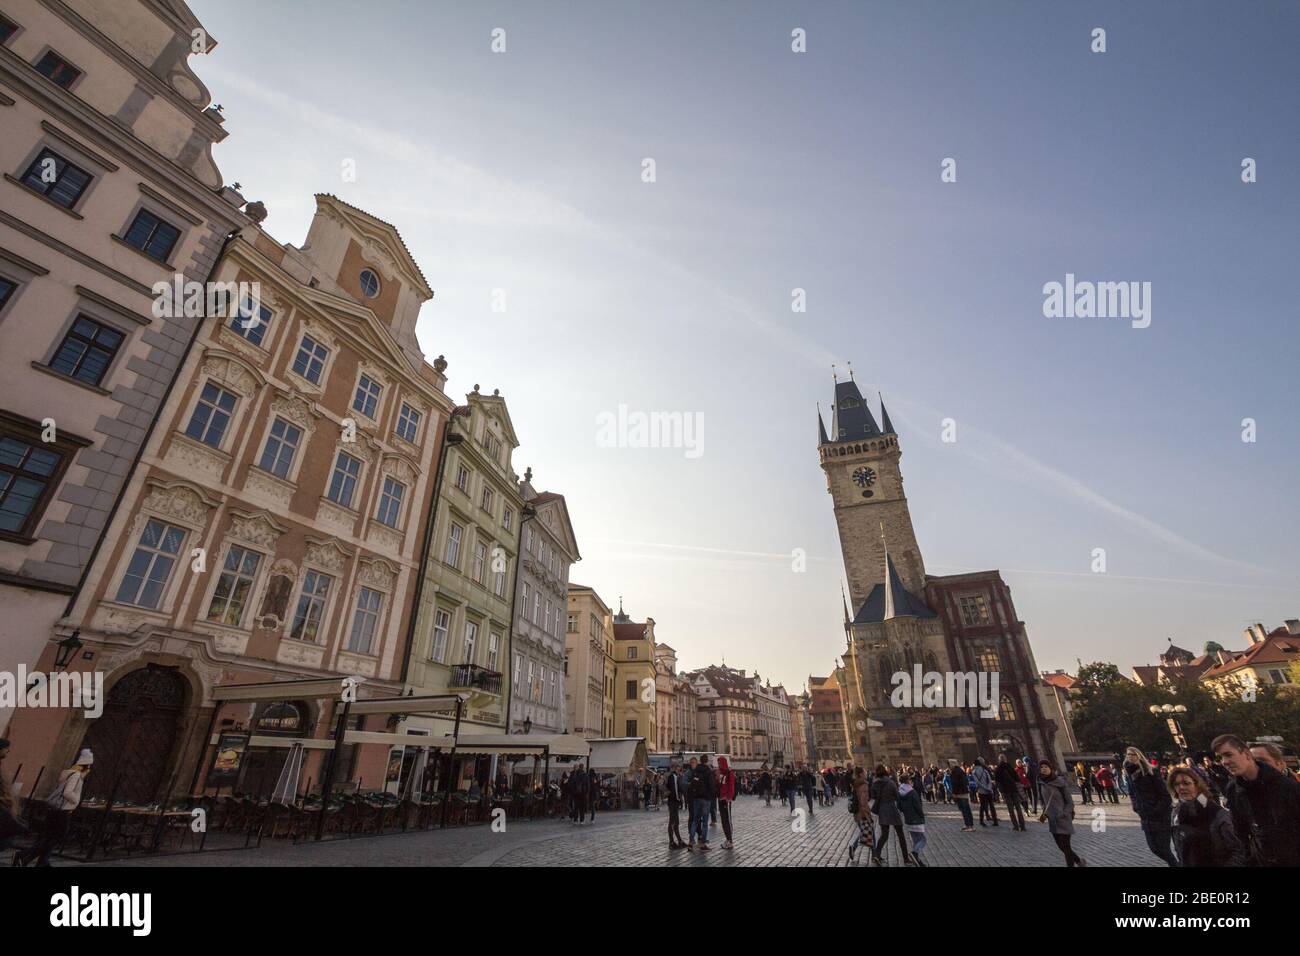 PRAGUE, CZECHIA - OCTOBER 31, 2019: Old Town Square (Staromestske Namesti) with a focus on the clock tower of Old Town Hall, a major landmark of Pragu Stock Photo